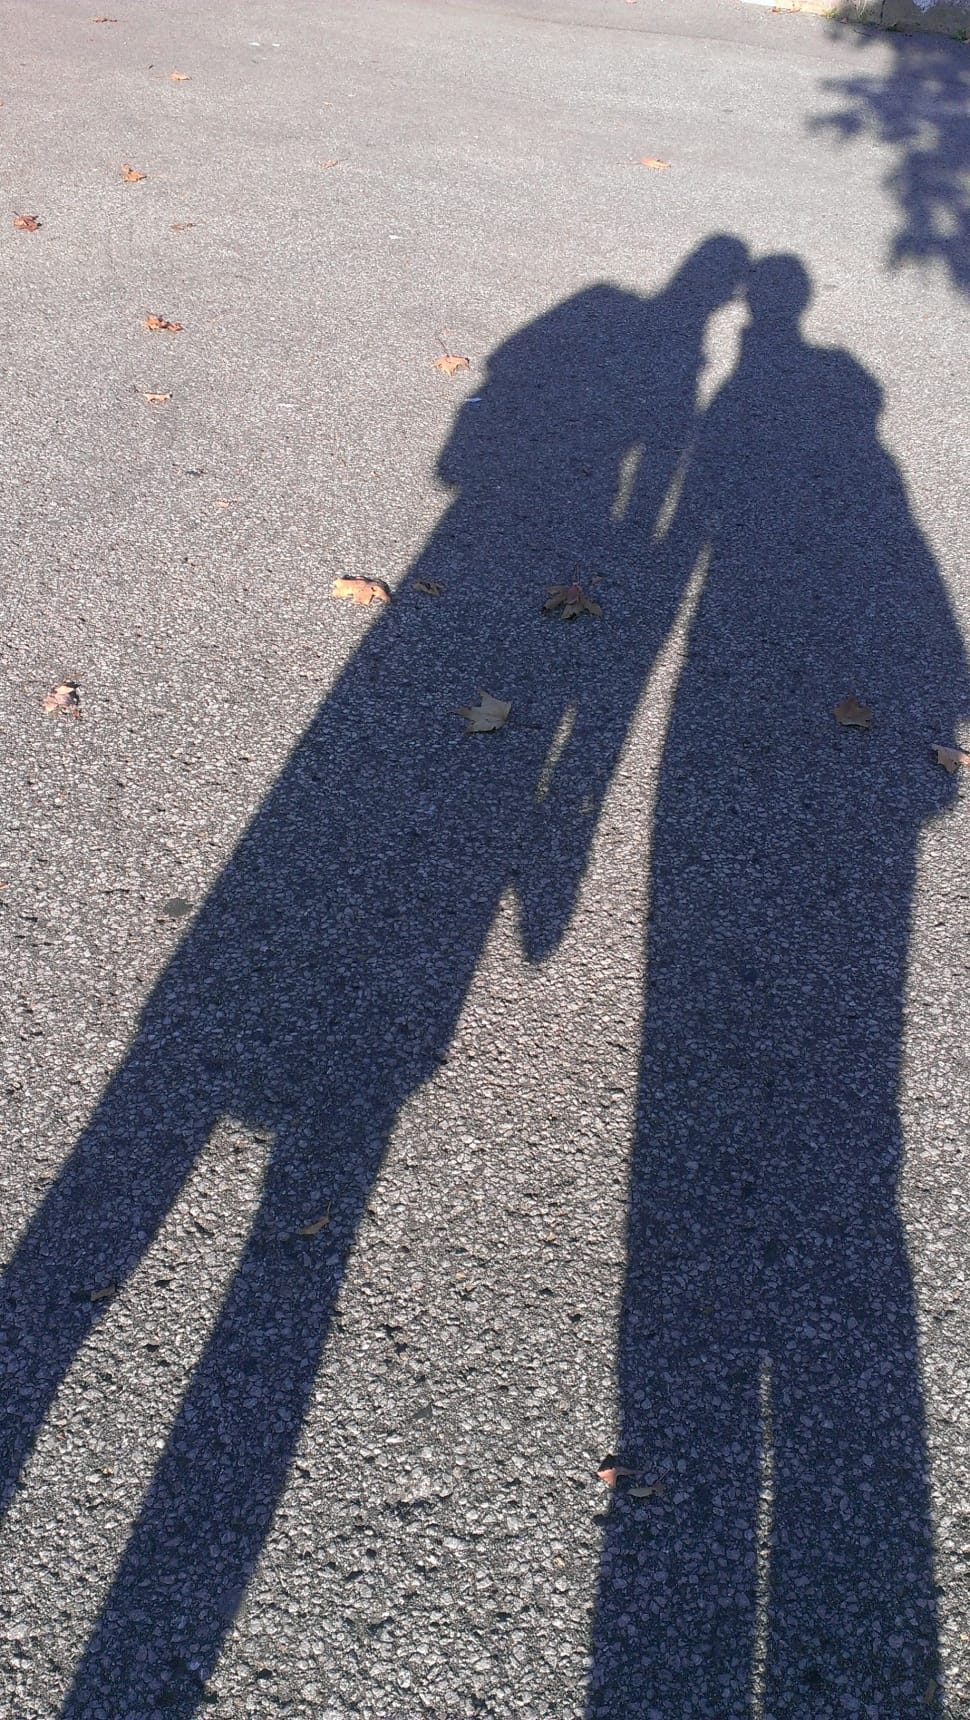 shadow of 2 person on asphalt road during daytime preview